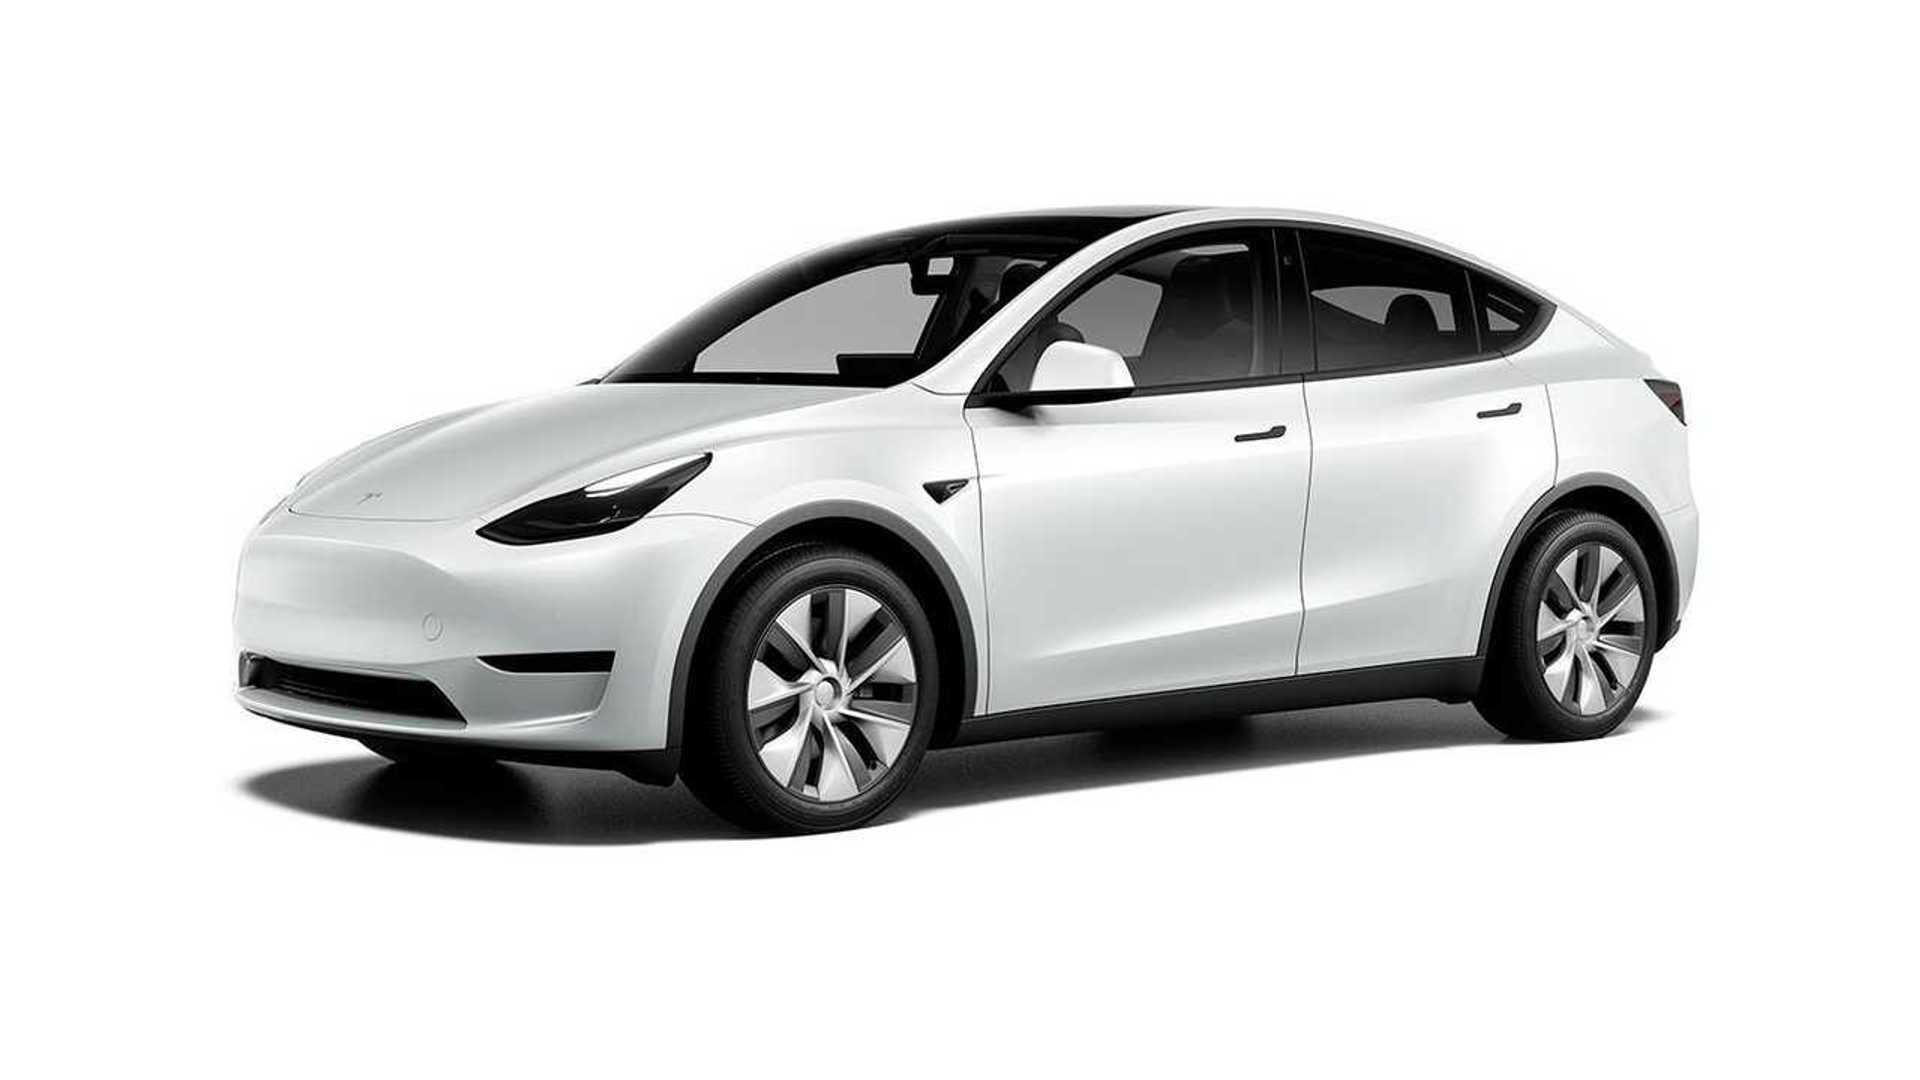 tesla offers six months of free supercharging for new model 3, model y purchases